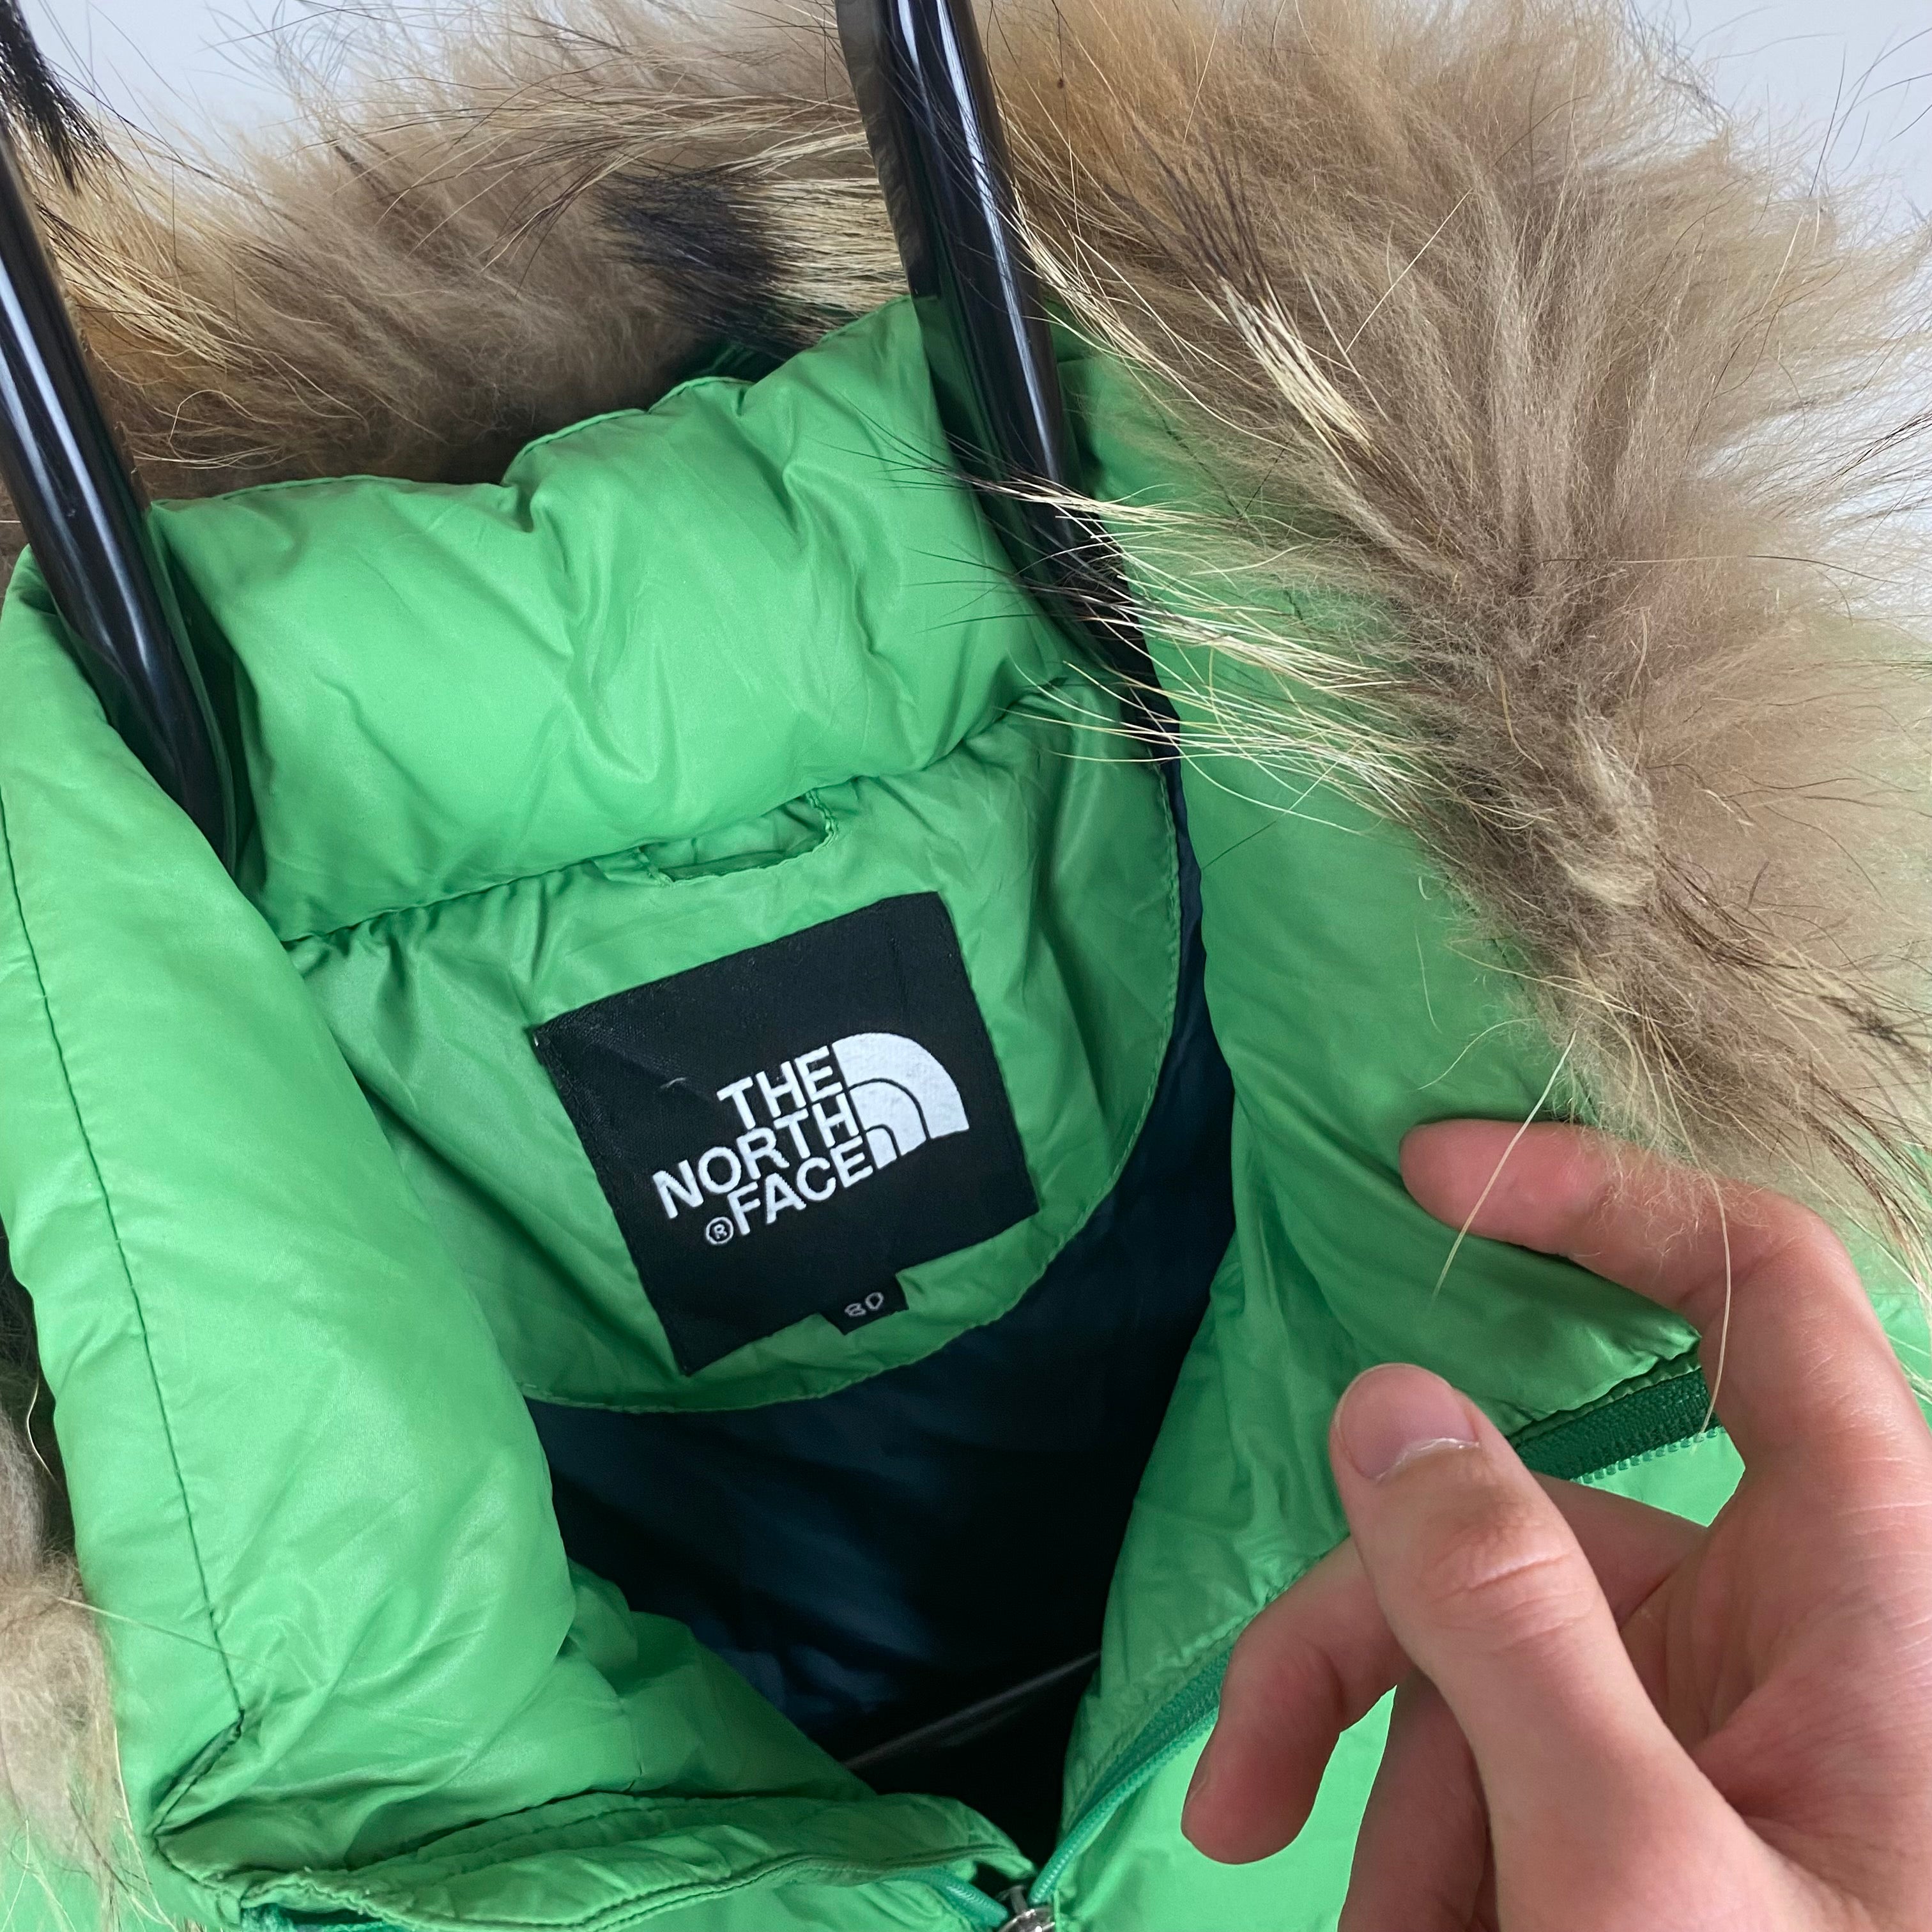 90s The North Face Puffer Jacket Green XS